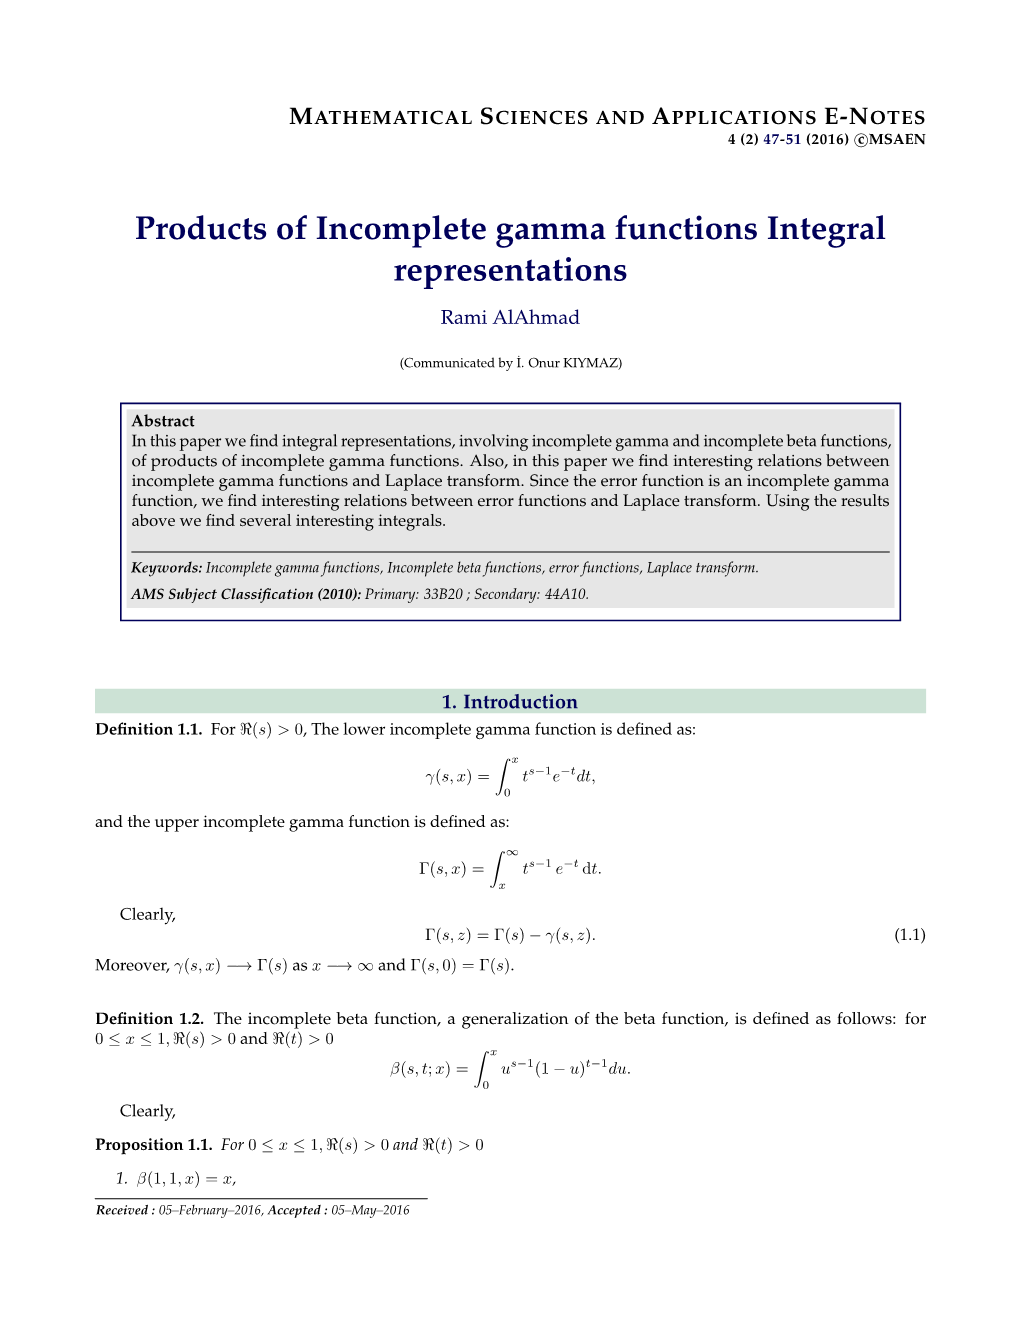 Products of Incomplete Gamma Functions Integral Representations